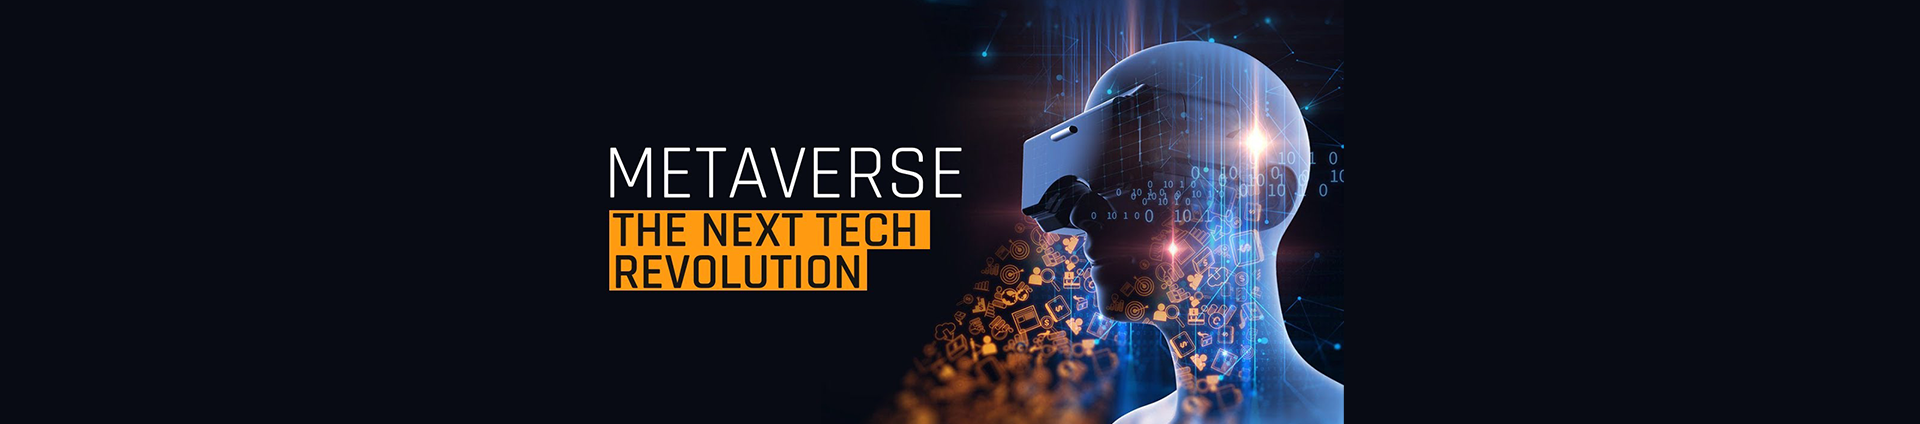 Metaverse is the Next Big Thing in the Internet Revolution